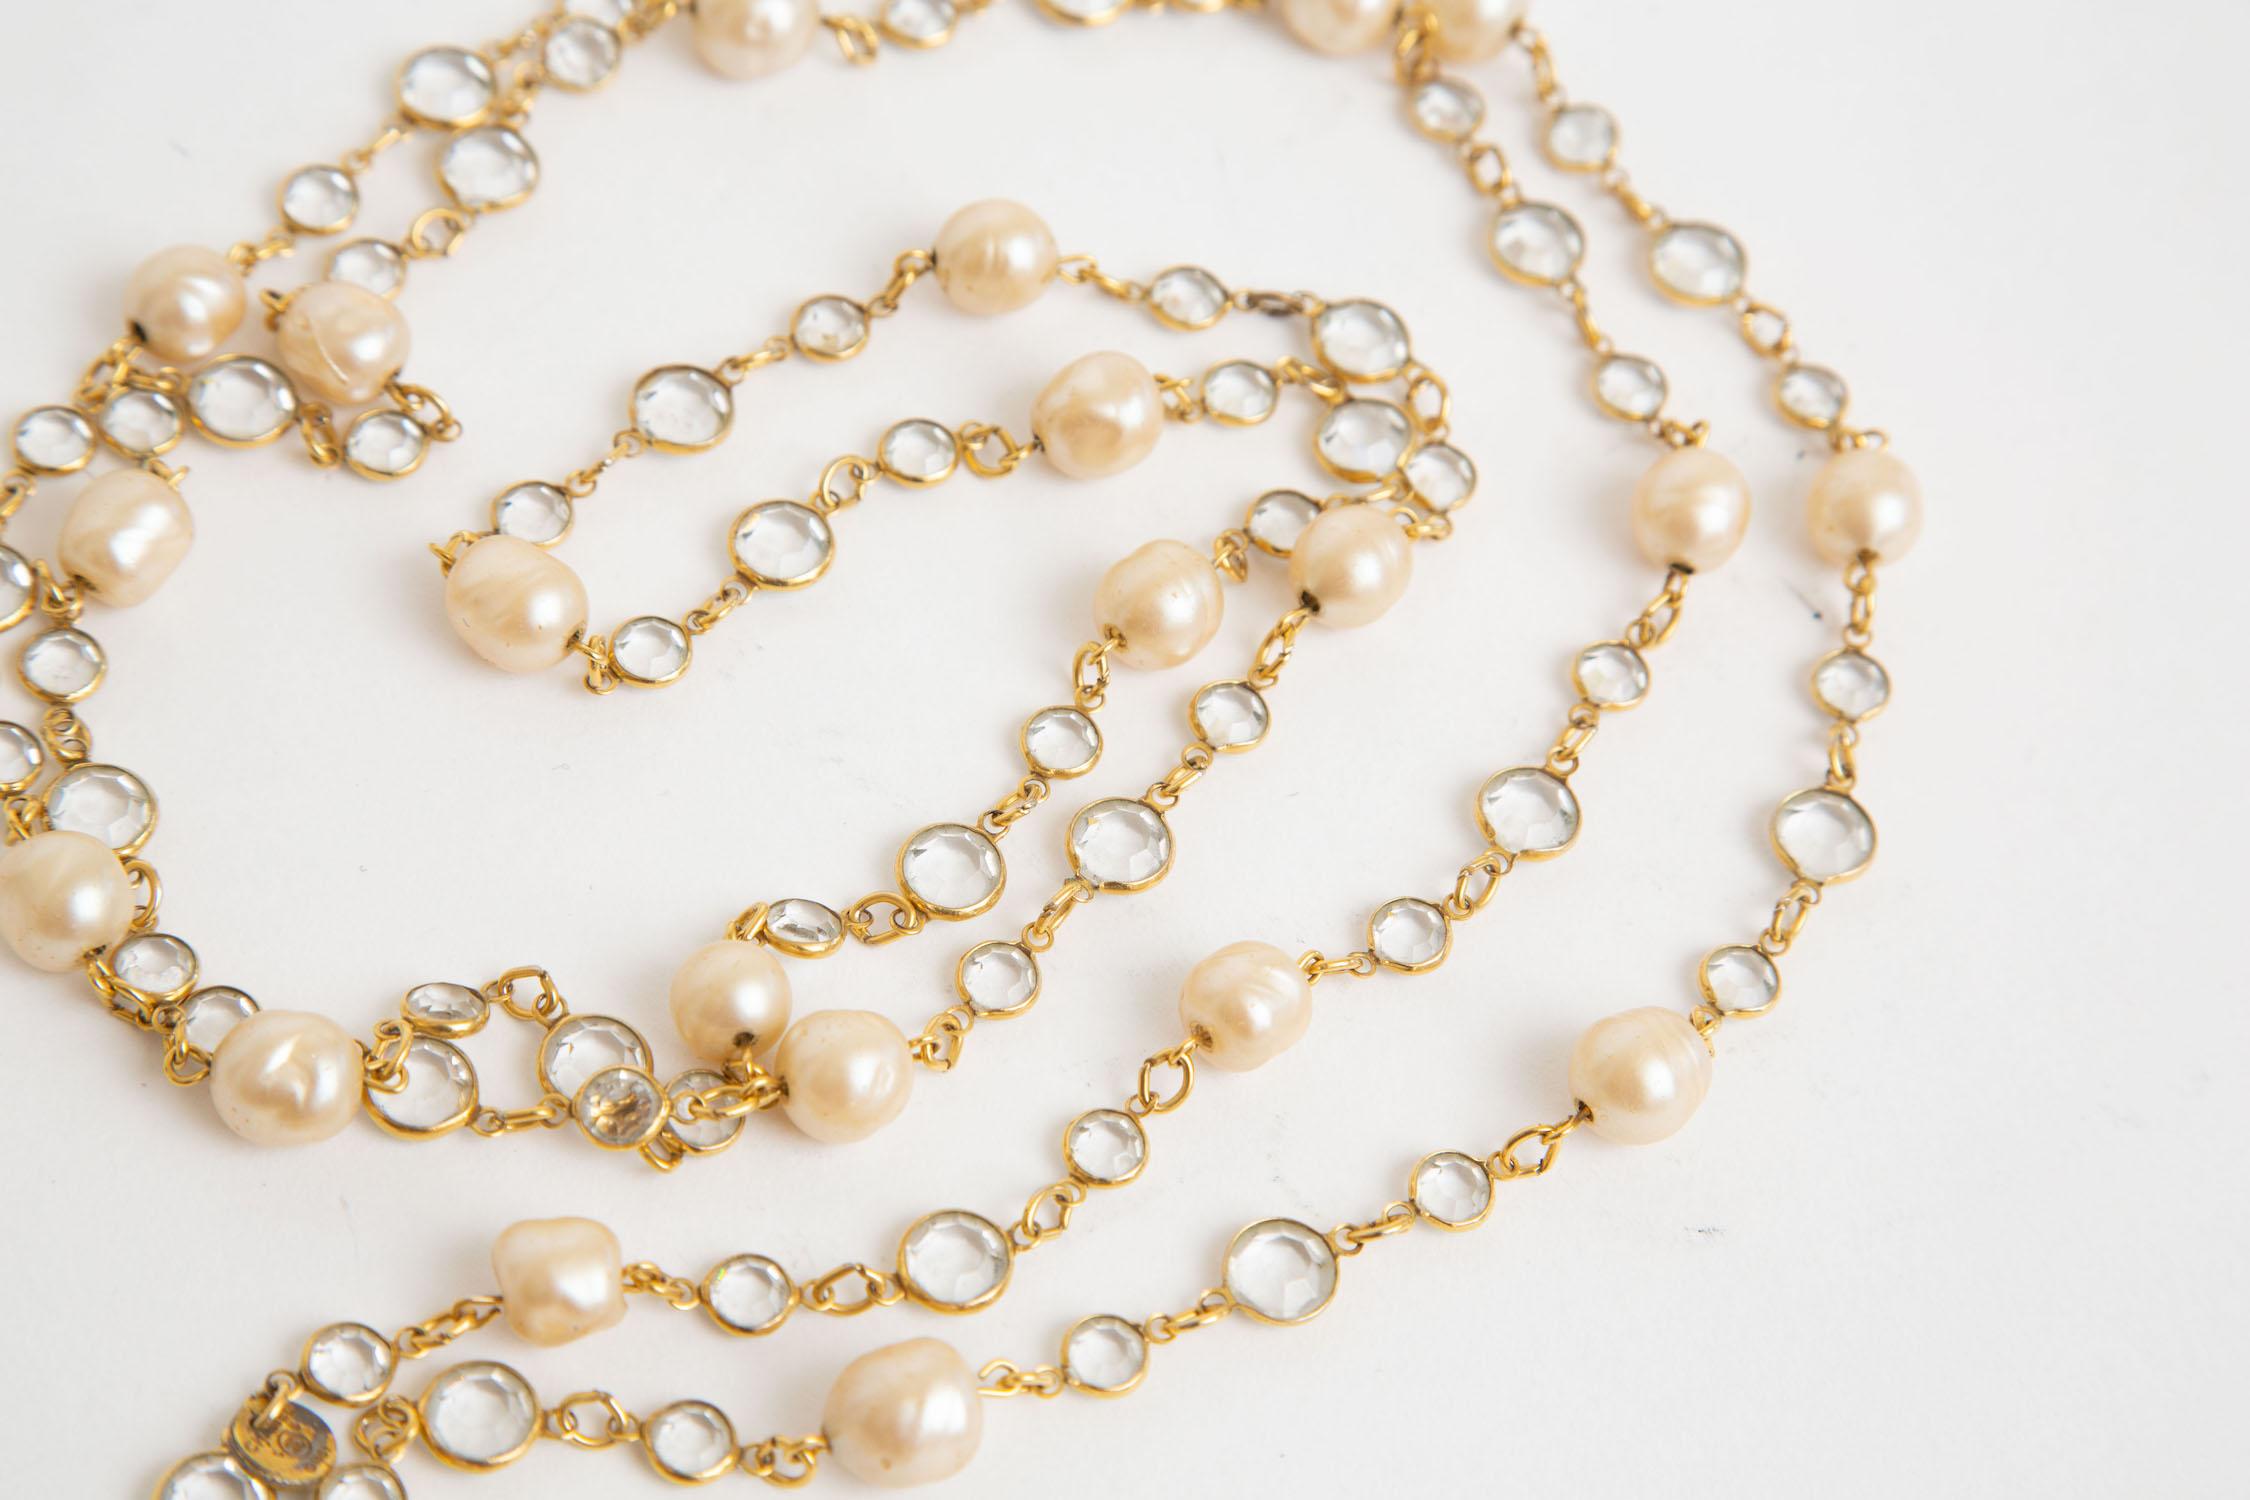 This vintage beveled crystals and faux pearl Chanel long chain and link sautoir necklace is 62 inches long and can wrap many times around as staggered lengths or even closer to your neck. The Chanel hangtag says 1981. The beveled crystals are clear